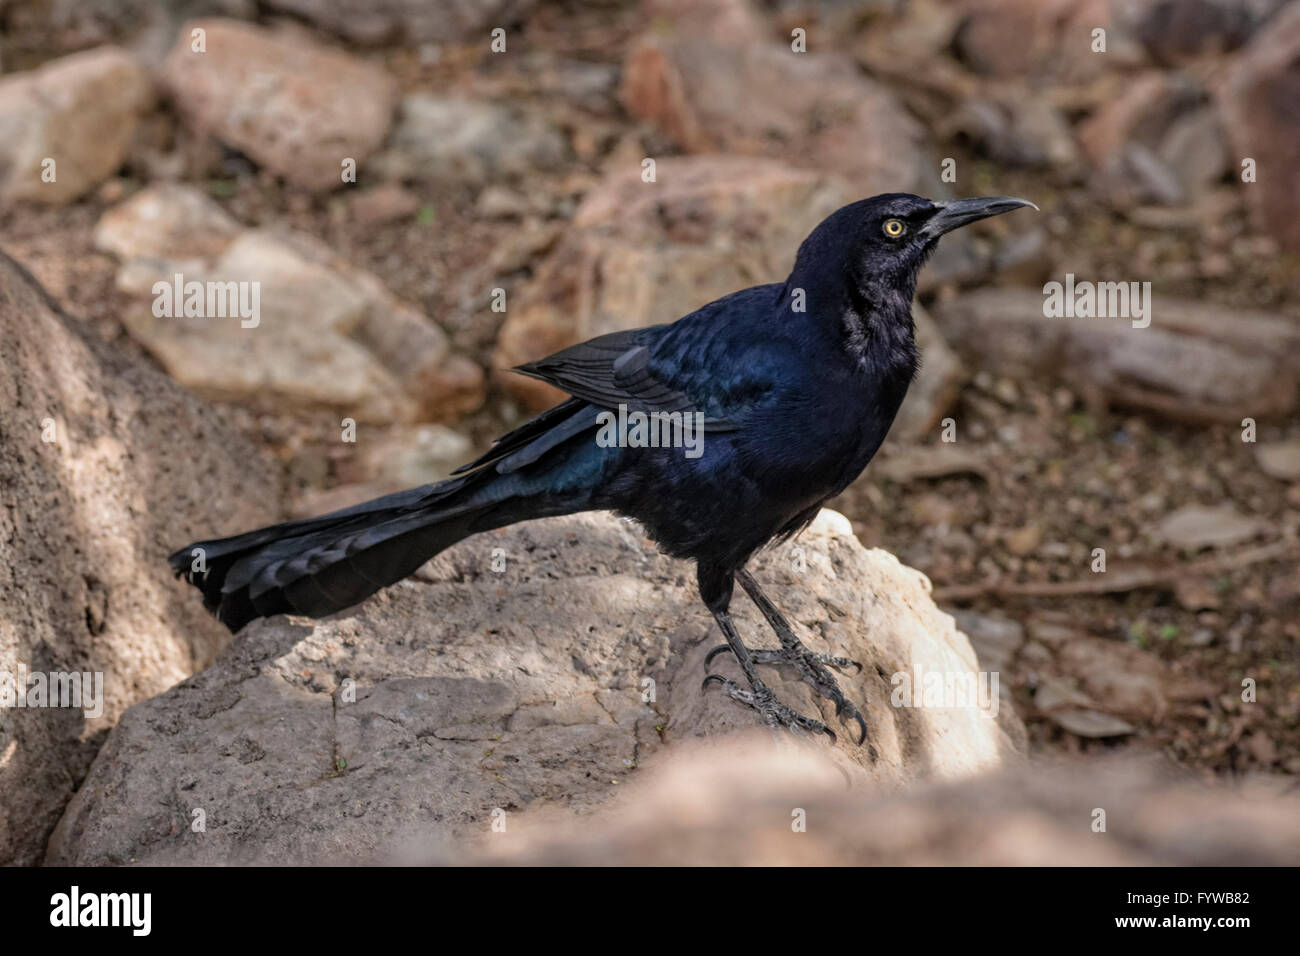 Great-tailed Grackle, Quiscalus mexicanus, Southern Arizona Stock Photo